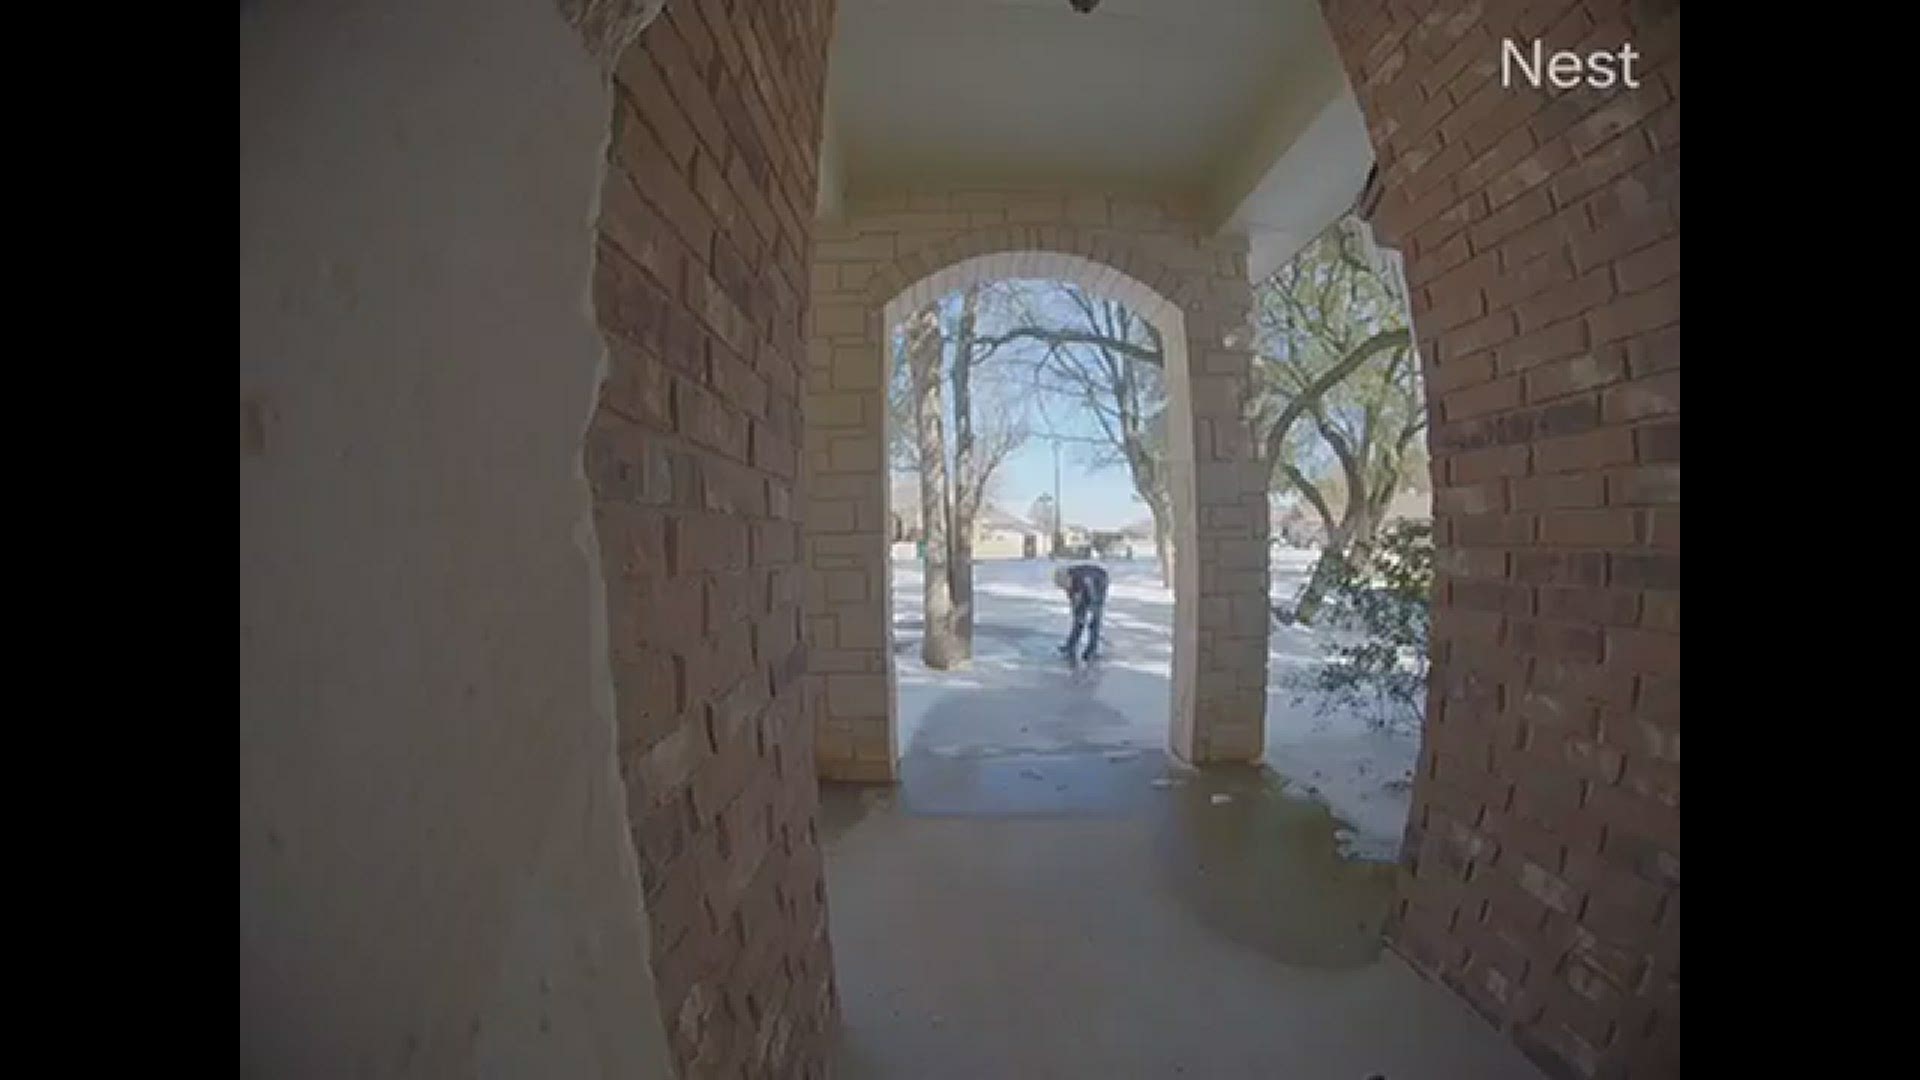 "My neighbor came over and shoveled the ice off my walk this afternoon. I saw it later on my door cam," Lynda Weatherby said.